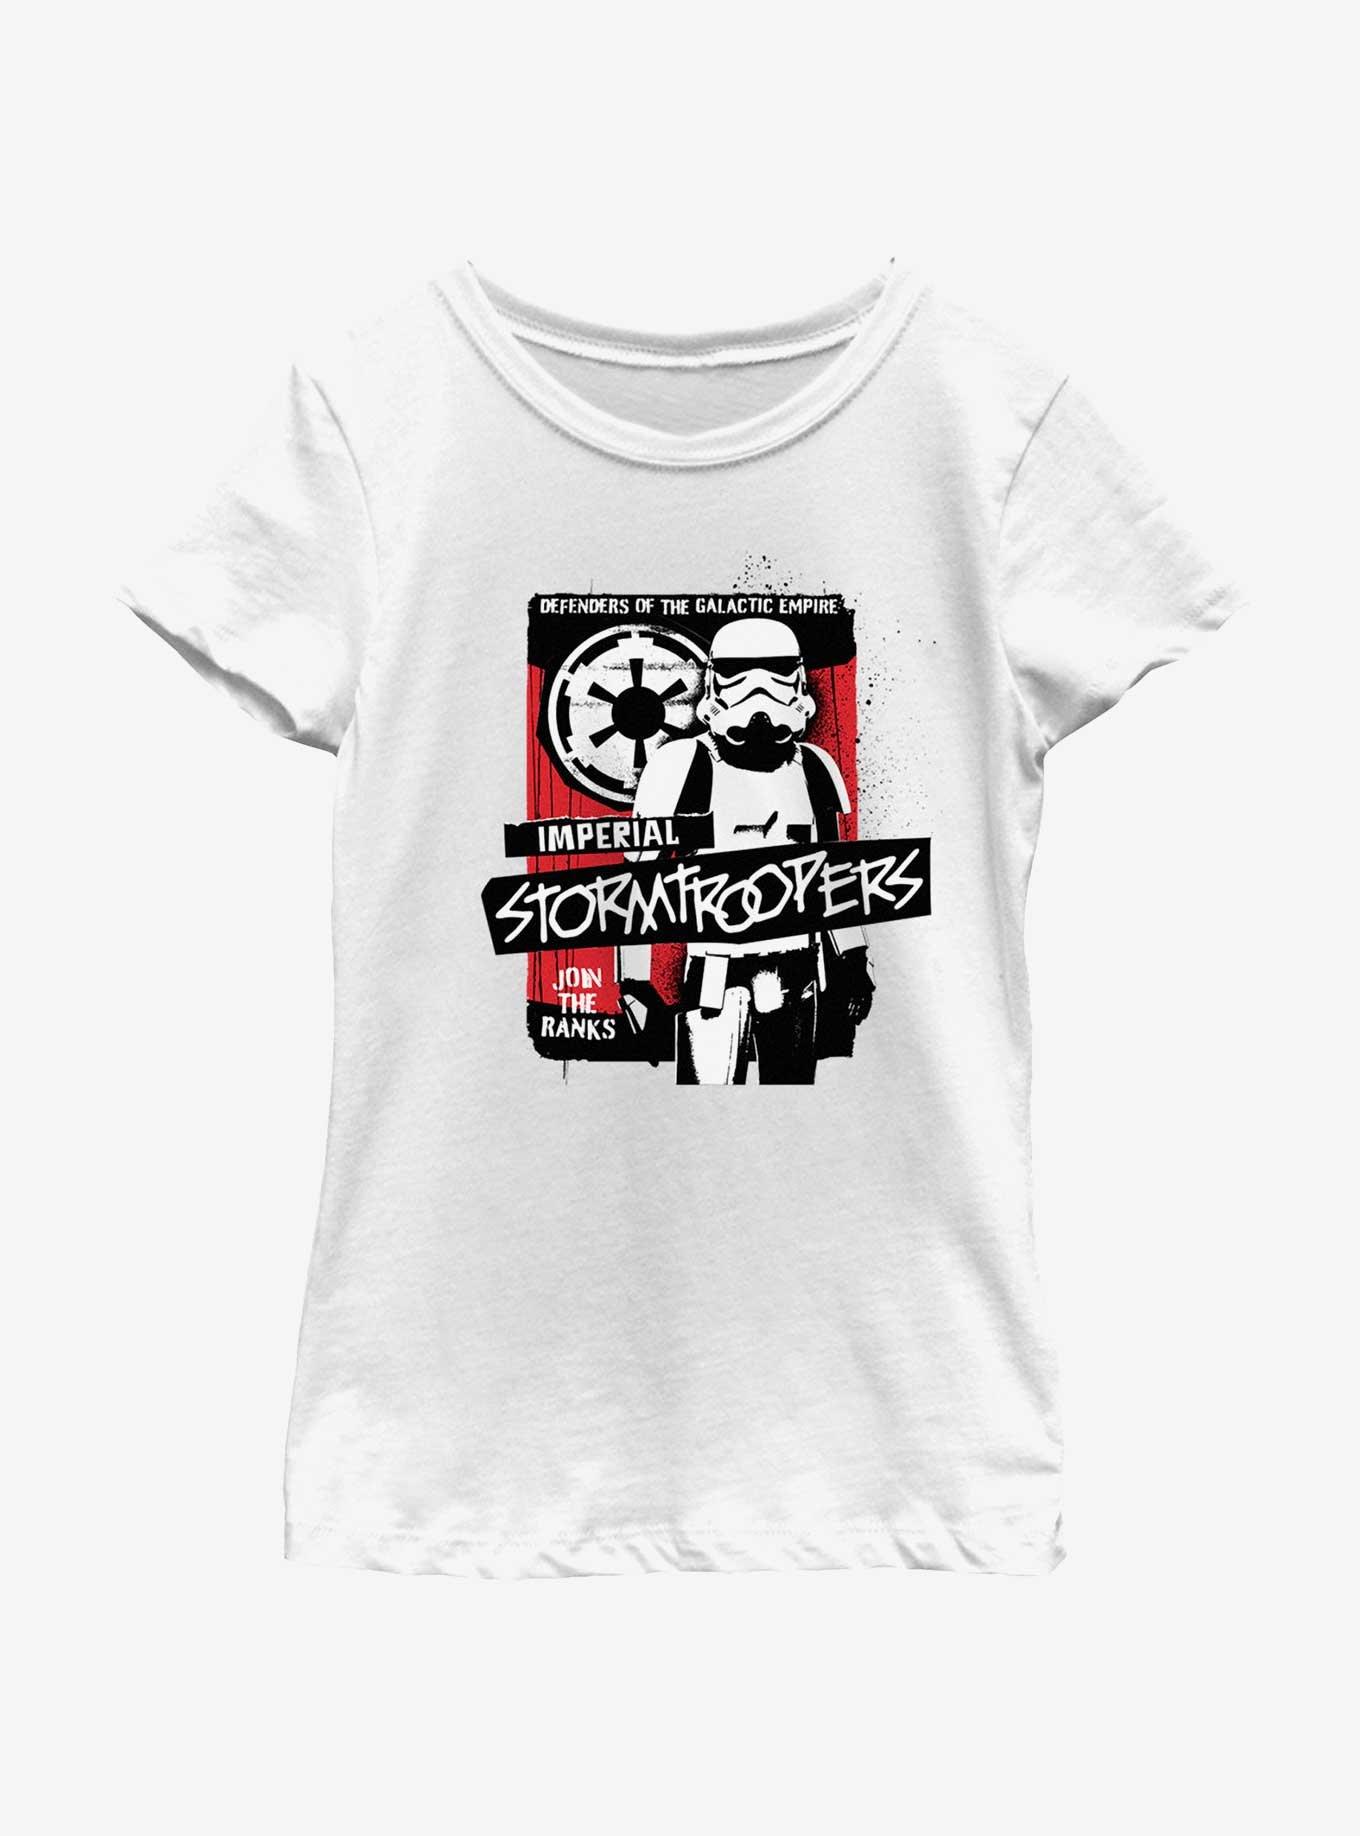 Star Wars Imperial Stormtroopers Graffiti Youth Girls T-Shirt, WHITE, hi-res